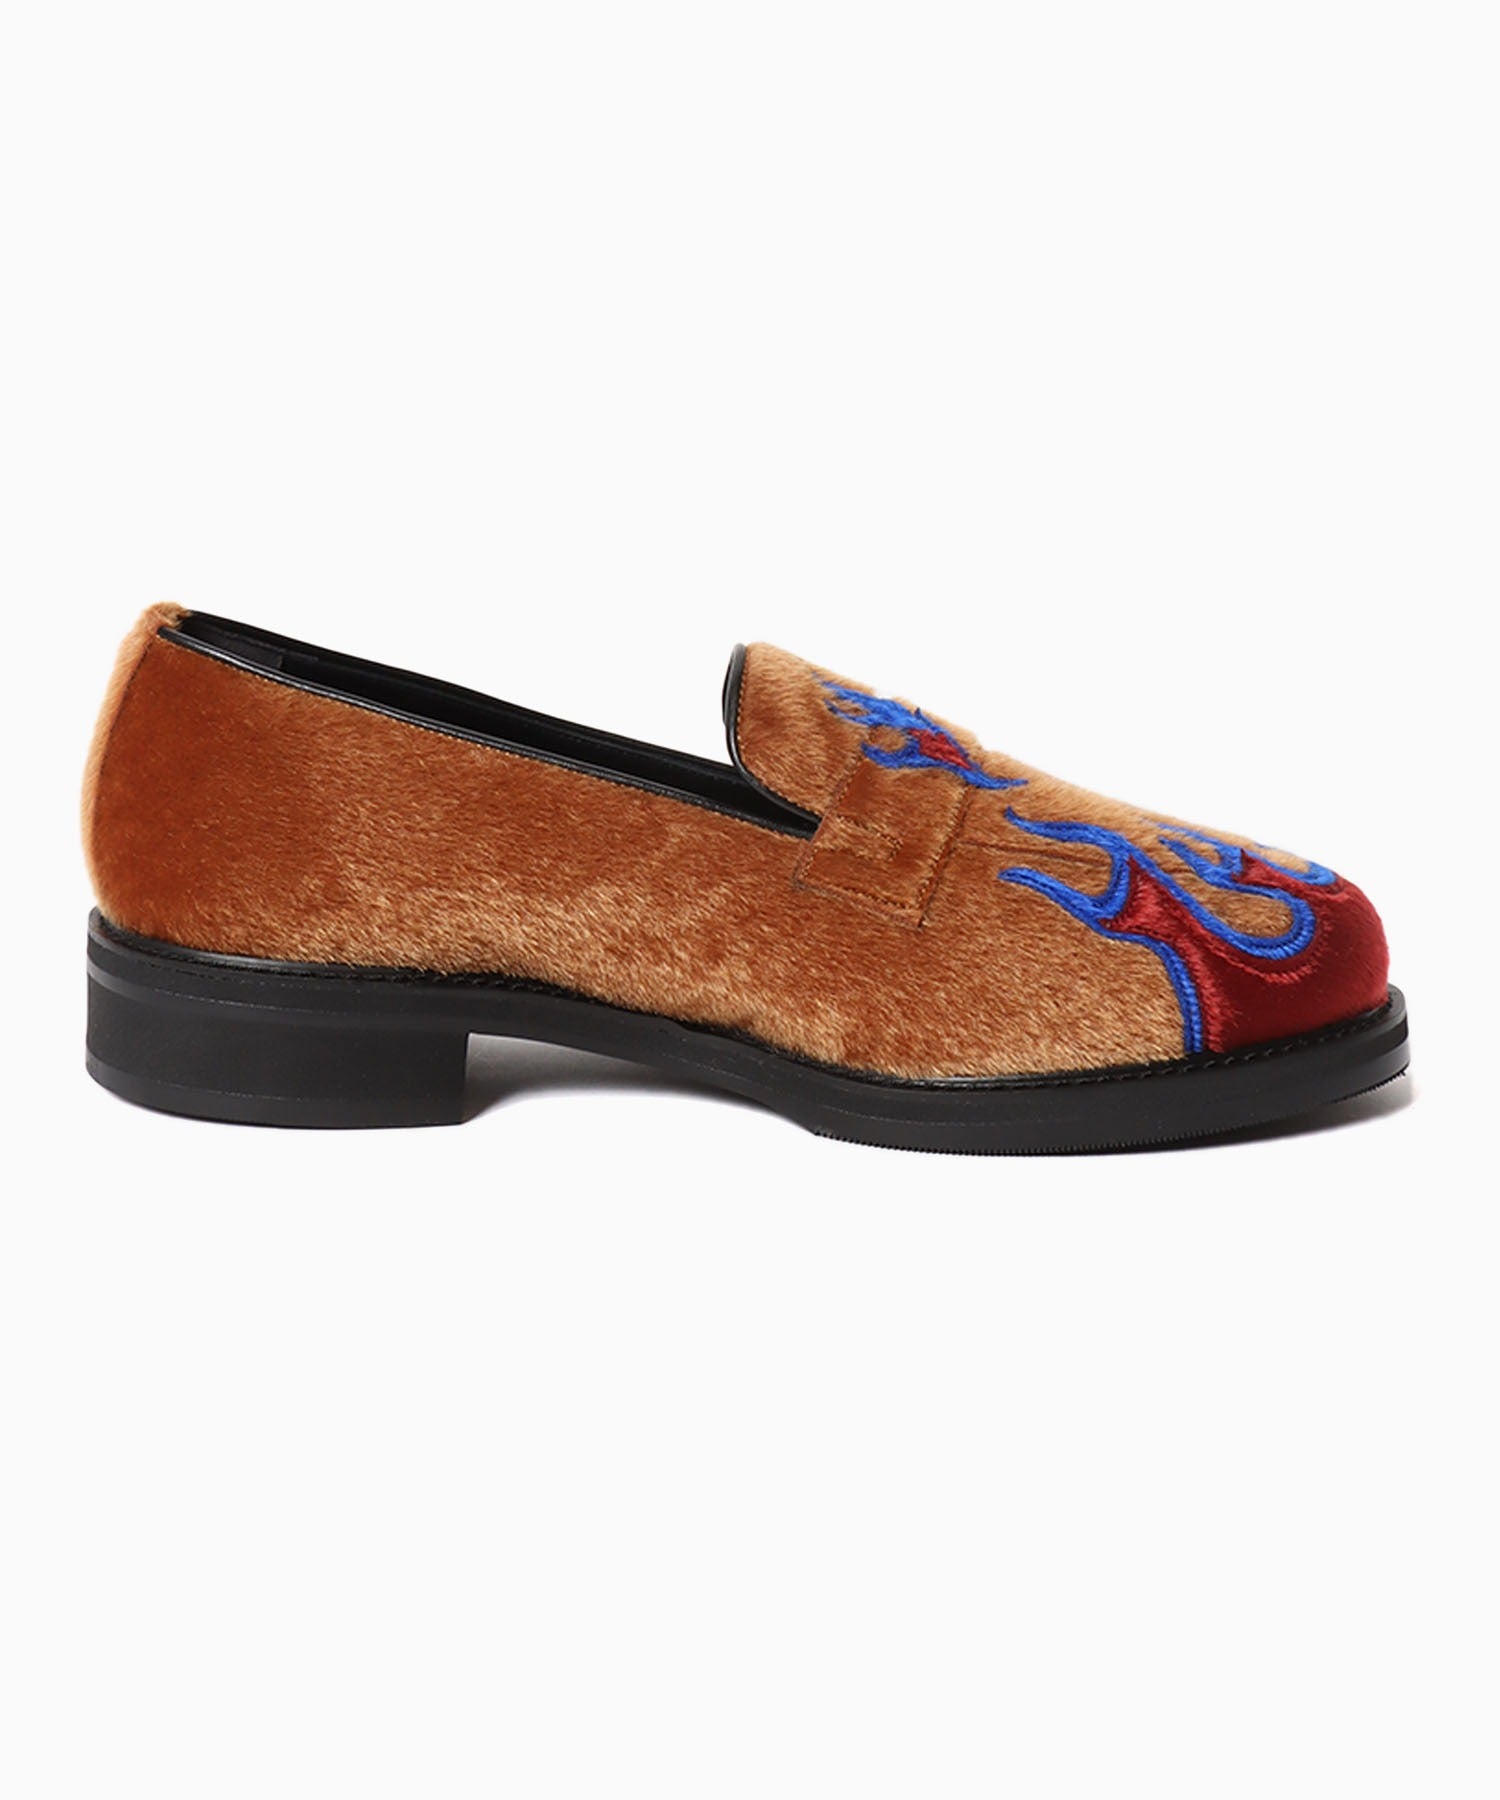 TENDER PERSON/テンダーパーソン FLAME PATTERN LOAFER